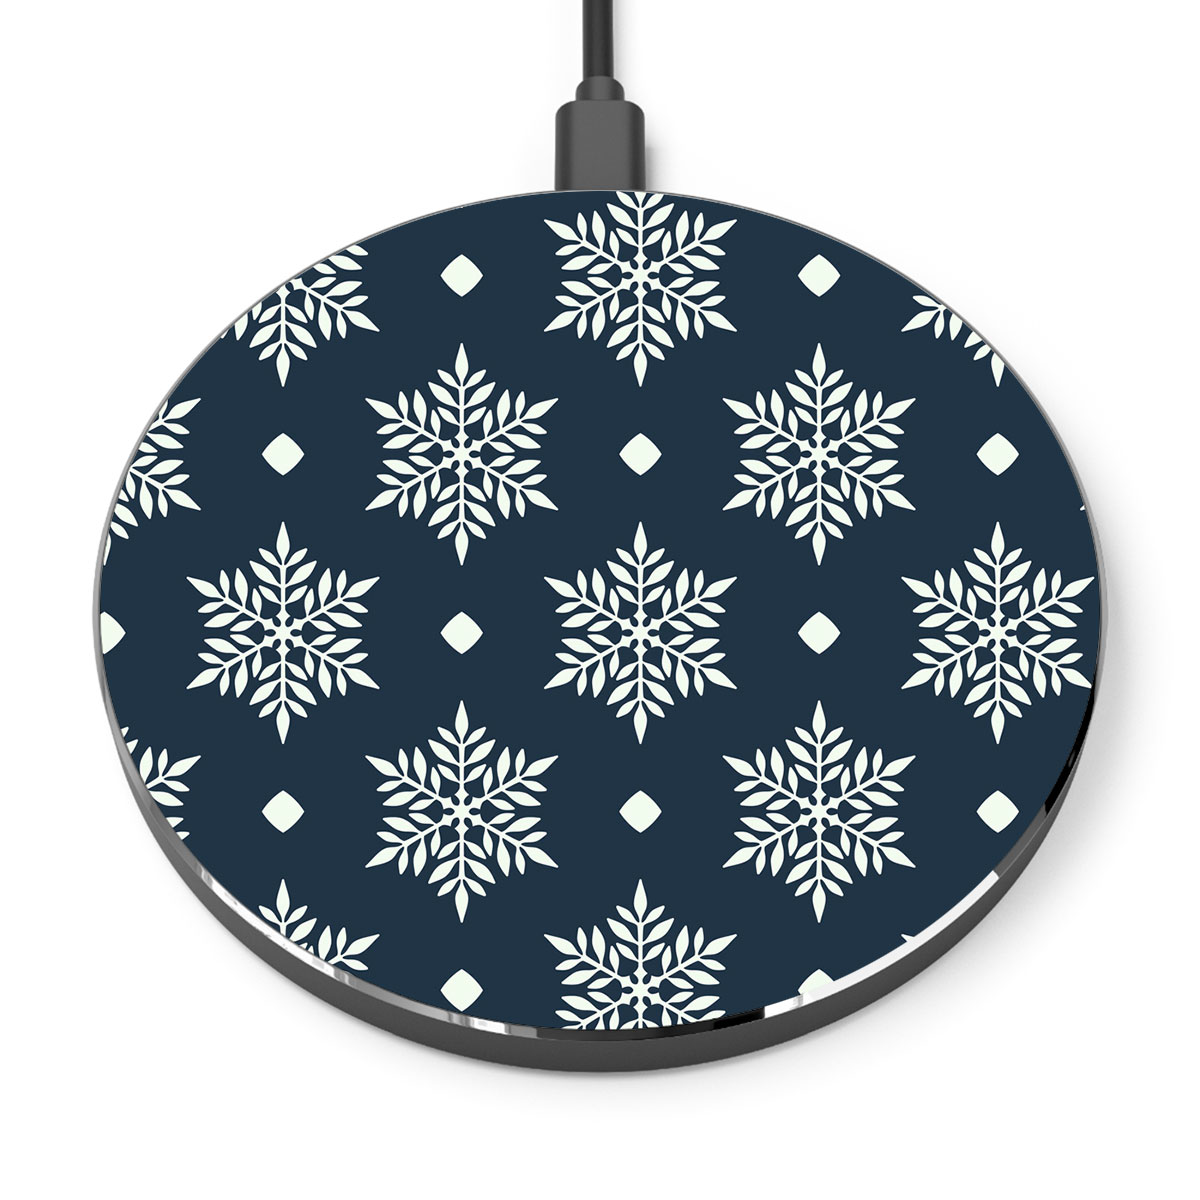 Snowflake On Dark Blue Background Printed Wireless Charger